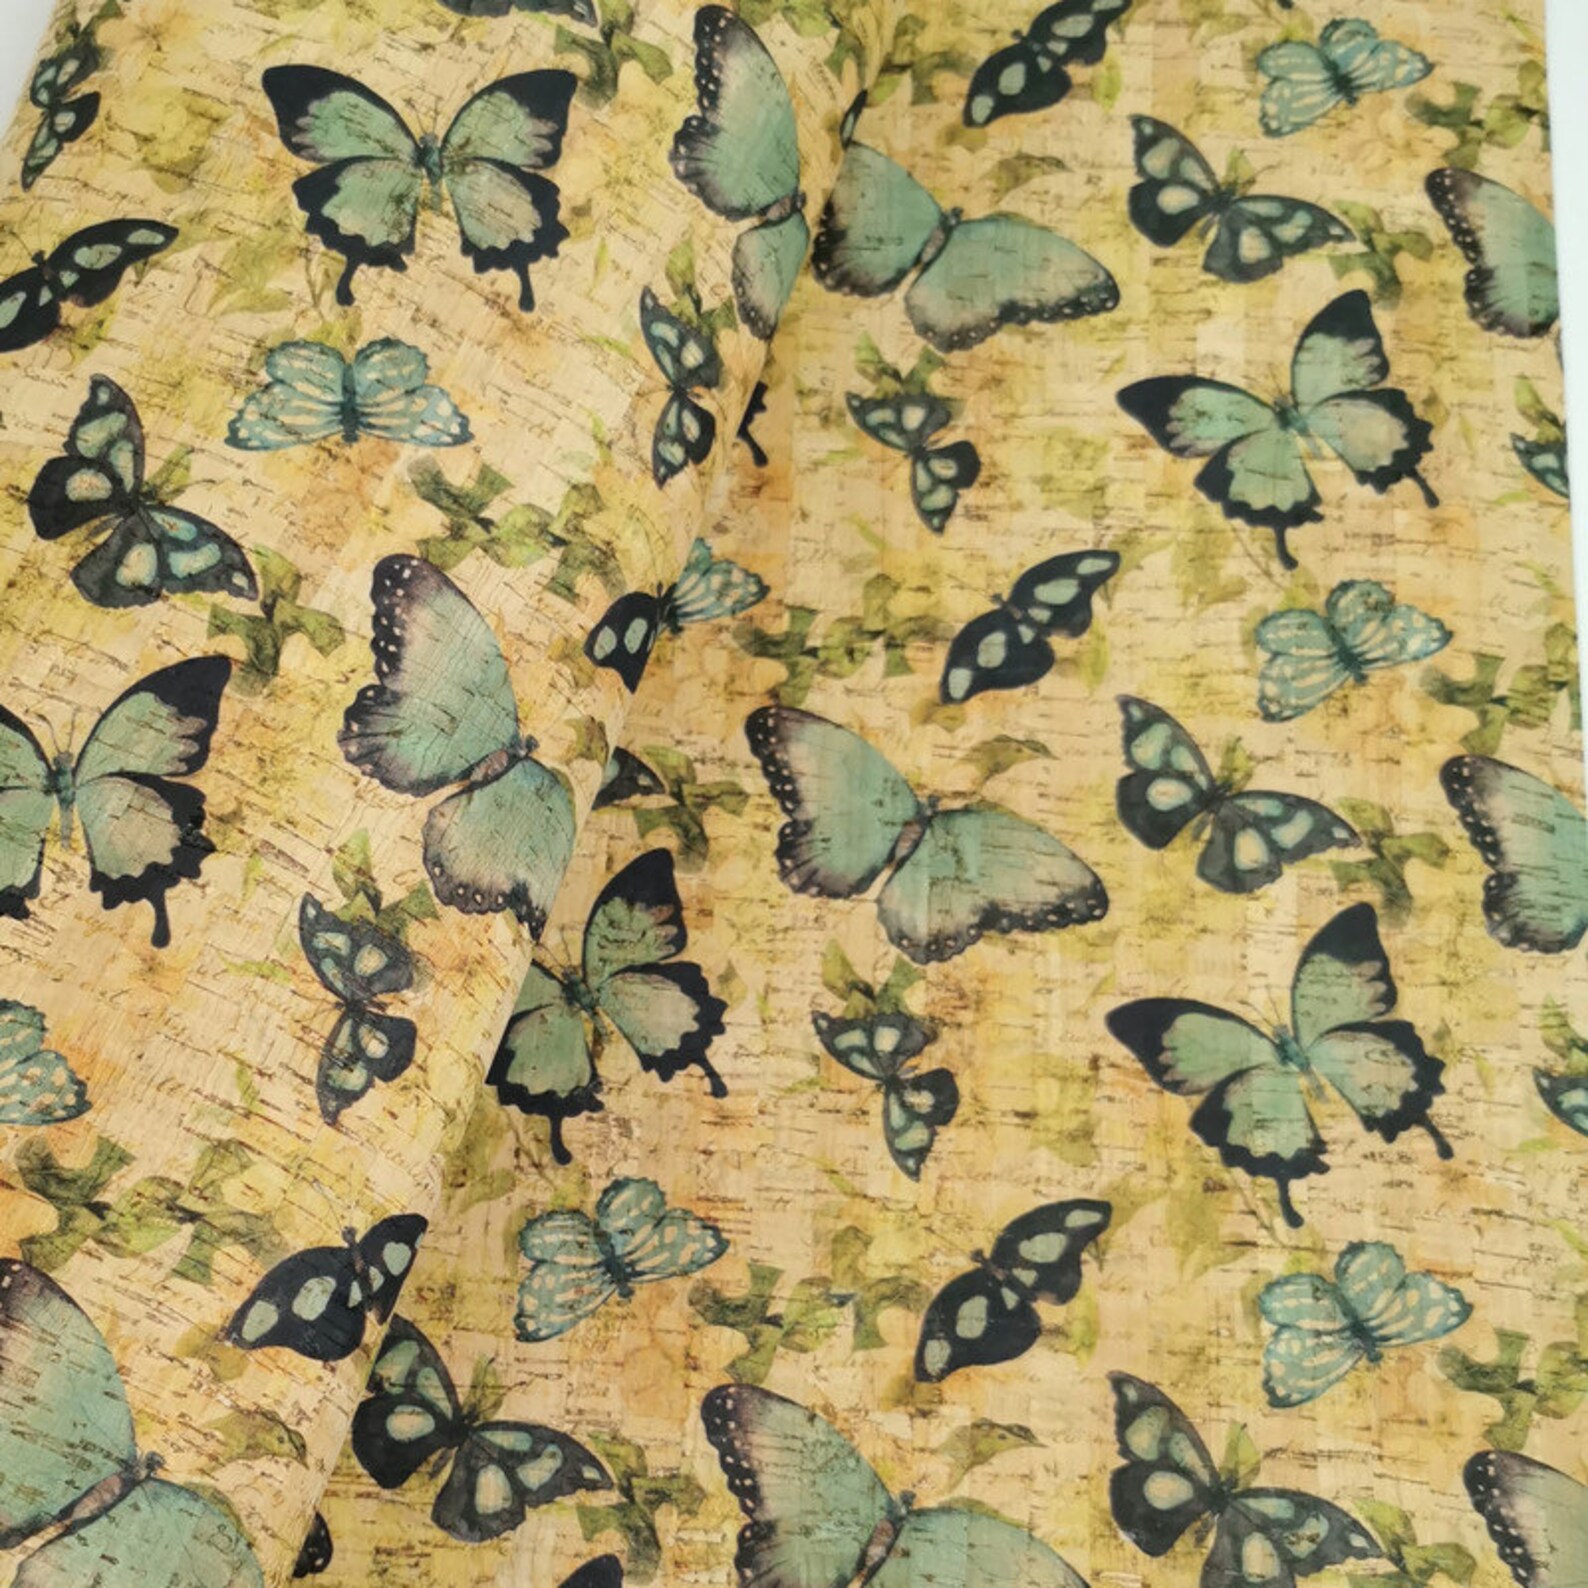 Portuguese Cork Fabric Butterfly Printed Pattern 68x50cm / - Etsy